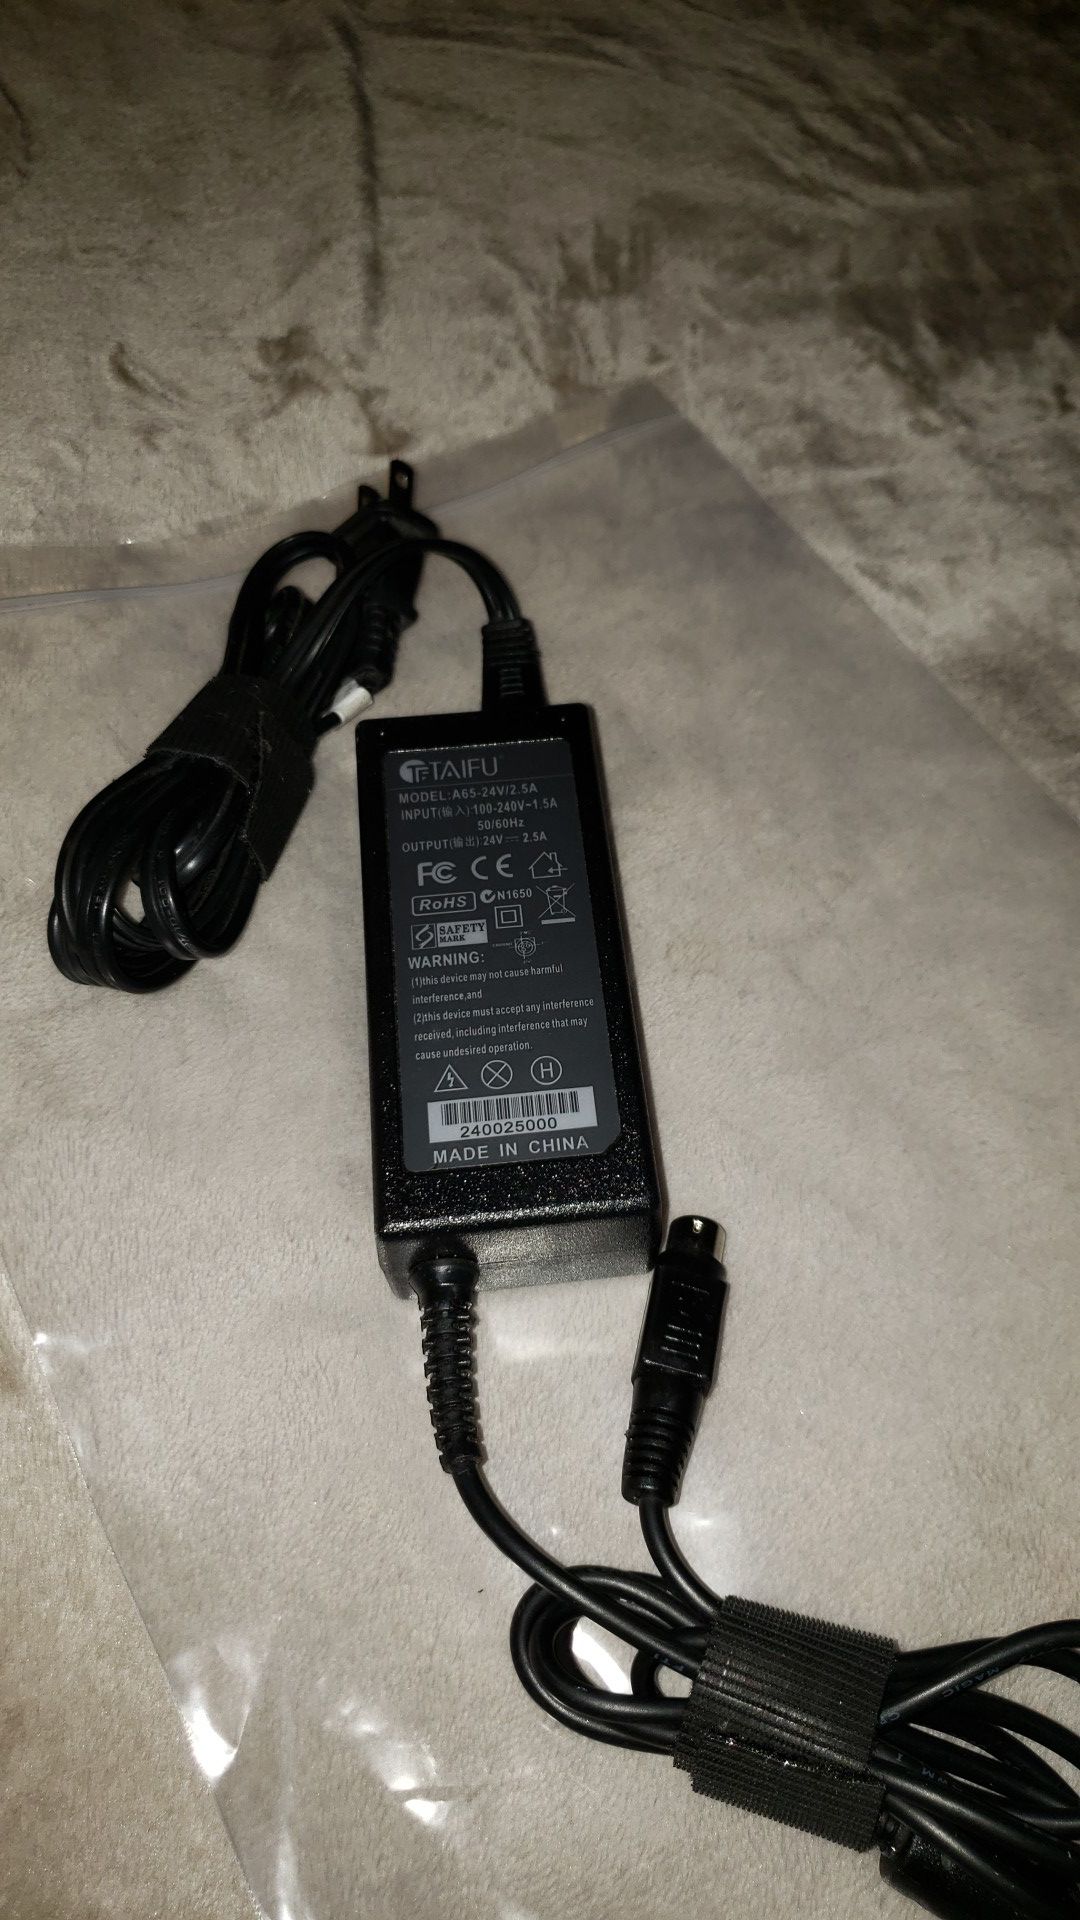 TAIFU A65-24V/2.5A AC Adapter and Power Supply Cable